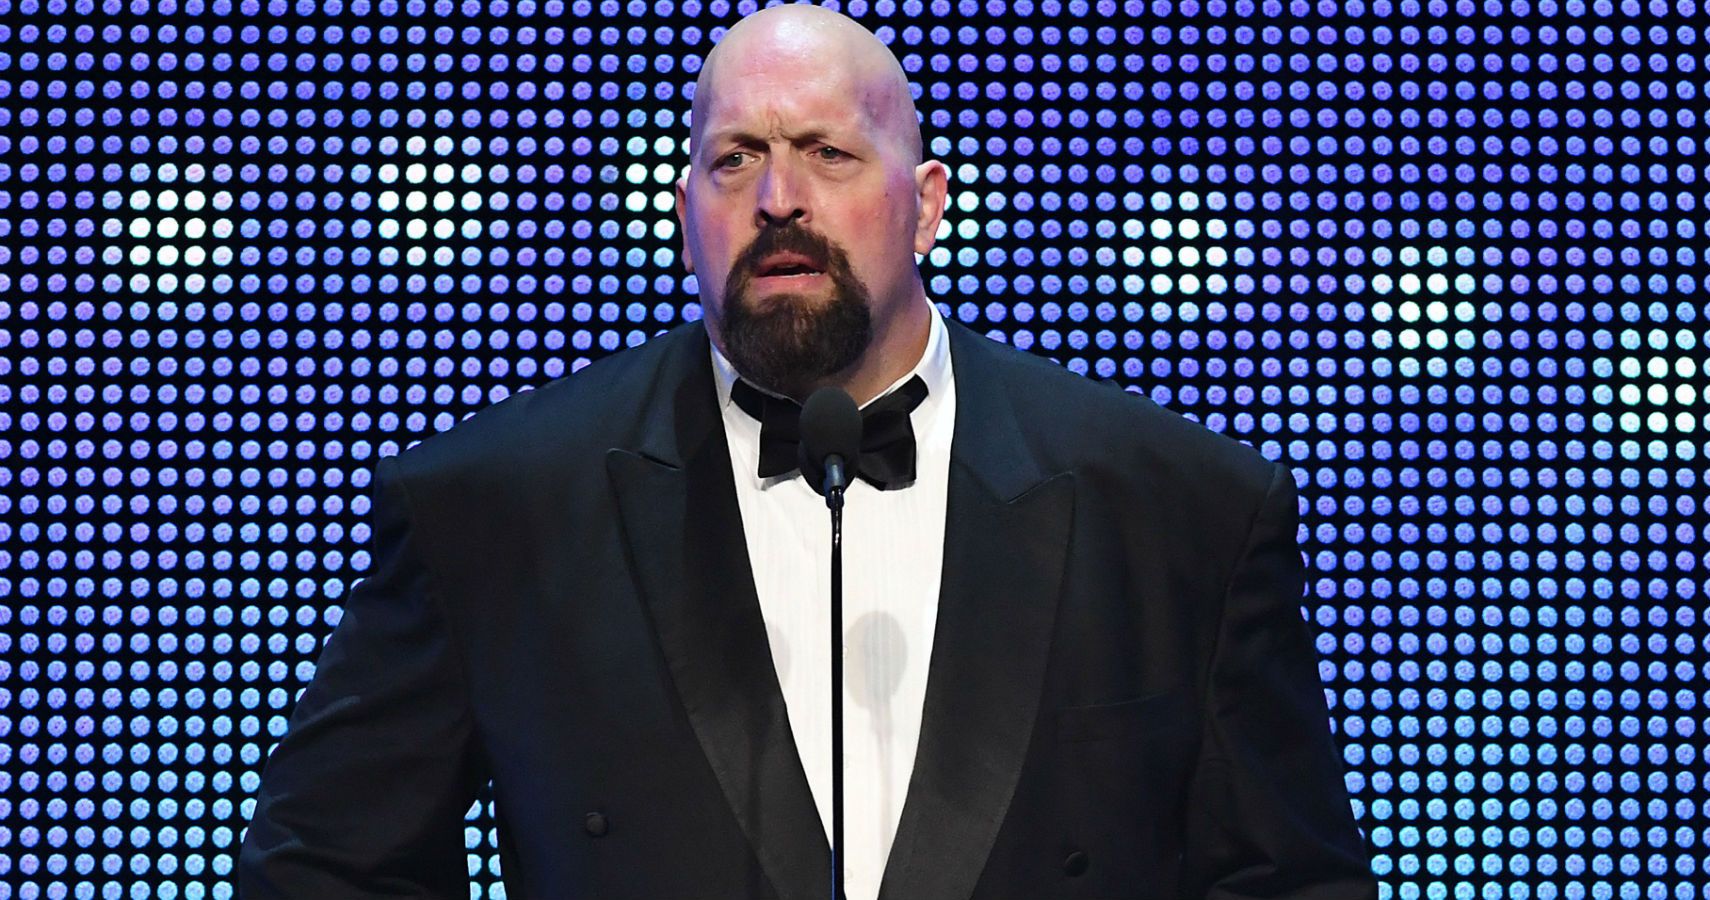 Marvel: Why The Big Show is (and isn't) the perfect Kingpin